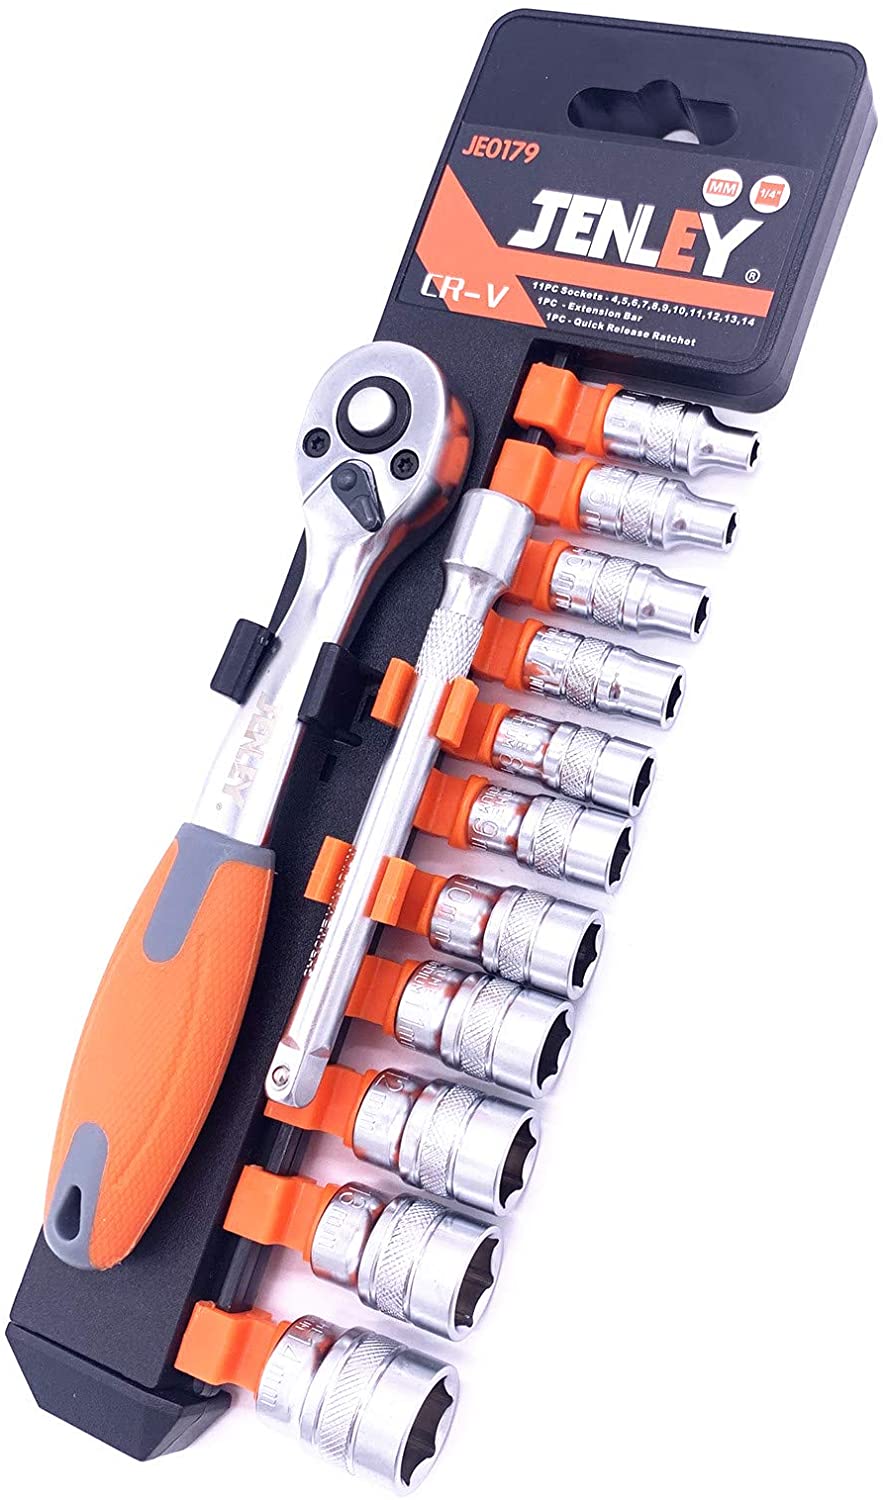 Photo 1 of JENLEY 14Inch Drive Ratchet Wrench Socket Wrench SetMetric Socket set CRV Sockets4mm14mm 72TeethQuickReleased Ratchet WrenchExtension bar for Repair Works 6Point13Pieces